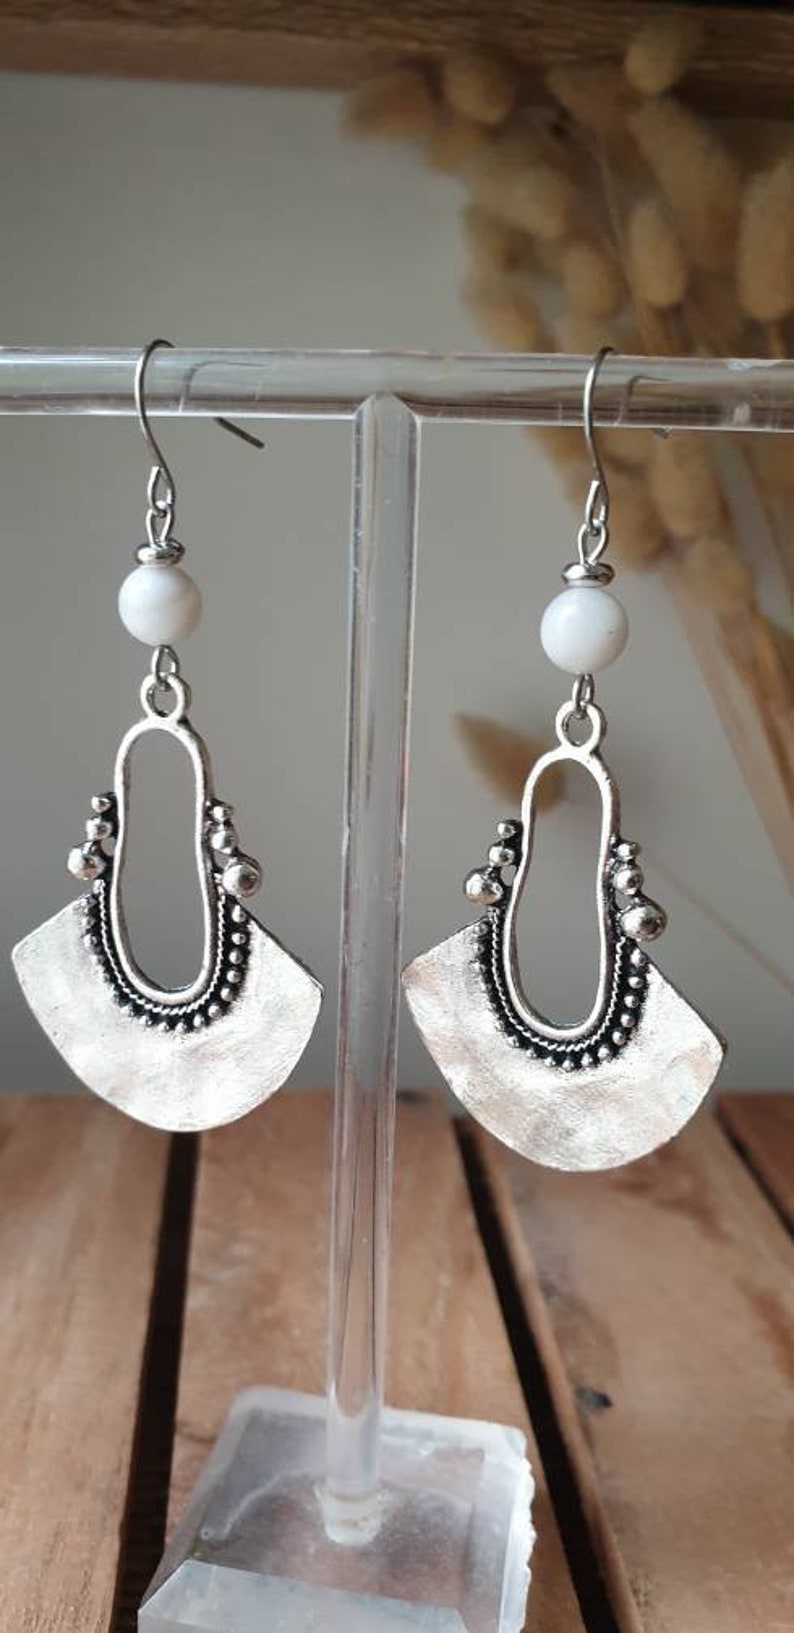 Dangling earrings silver and white large loop ethnic natural pearls Women's jewelry. Handcrafted jewelry gift image 4